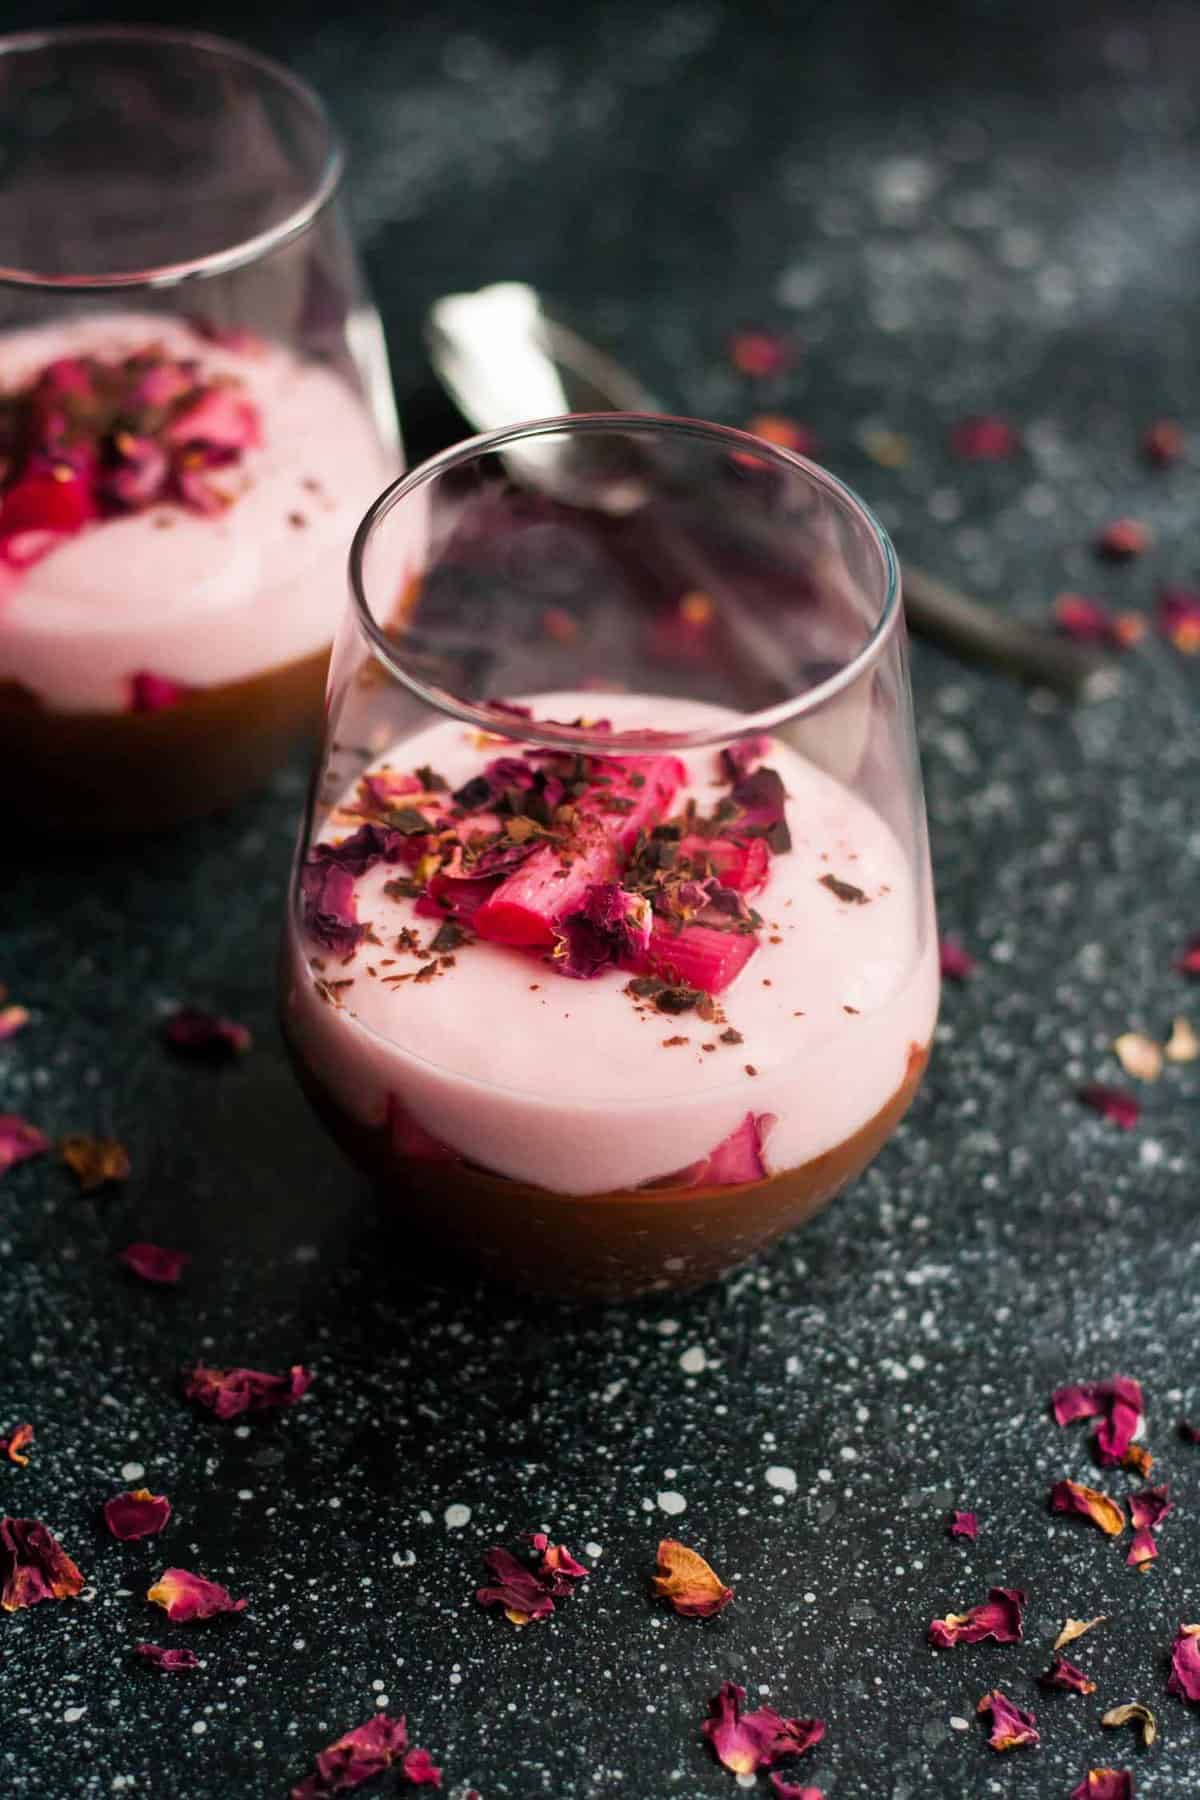 A close up of two glasses of rhubarb and chocolate parfait with a spoon behind.